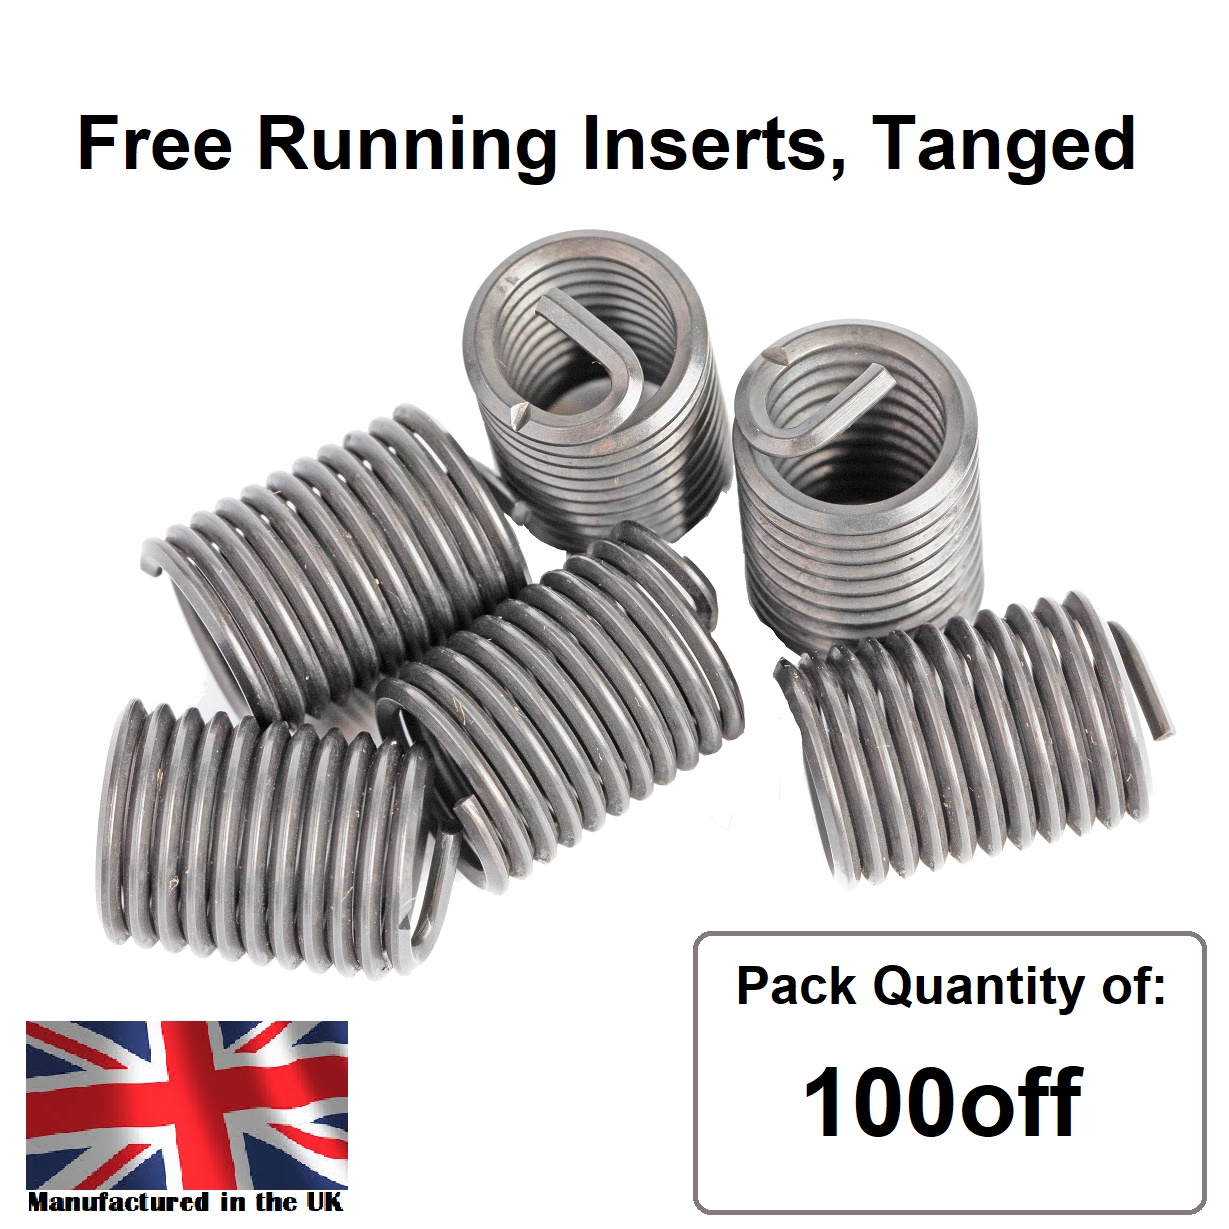 M2.5 x 0.45 x 2D Metric Coarse, Free Running, Tanged, Wire Thread Repair Insert, 304/A2 Stainless (Pack 100)